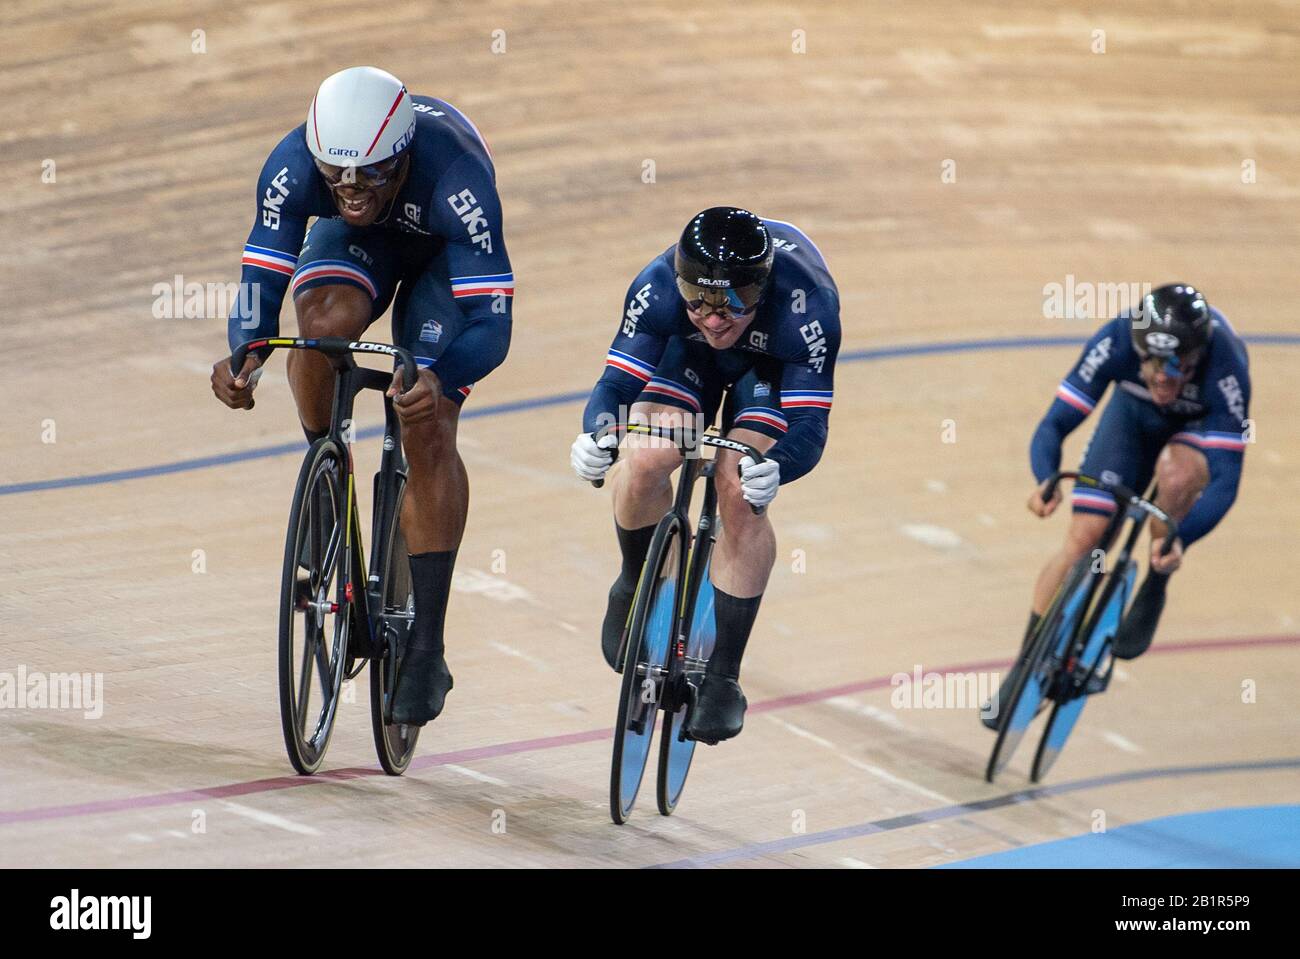 Berlin, Germany. 26th Feb, 2020. Cycling/track: World Championship, team sprint men, final: The team from France, Gregory Bauge (l-r), Sebastien Vigier and Quentin Lafargue, rides on the track. Credit: Sebastian Gollnow/dpa/Alamy Live News Stock Photo